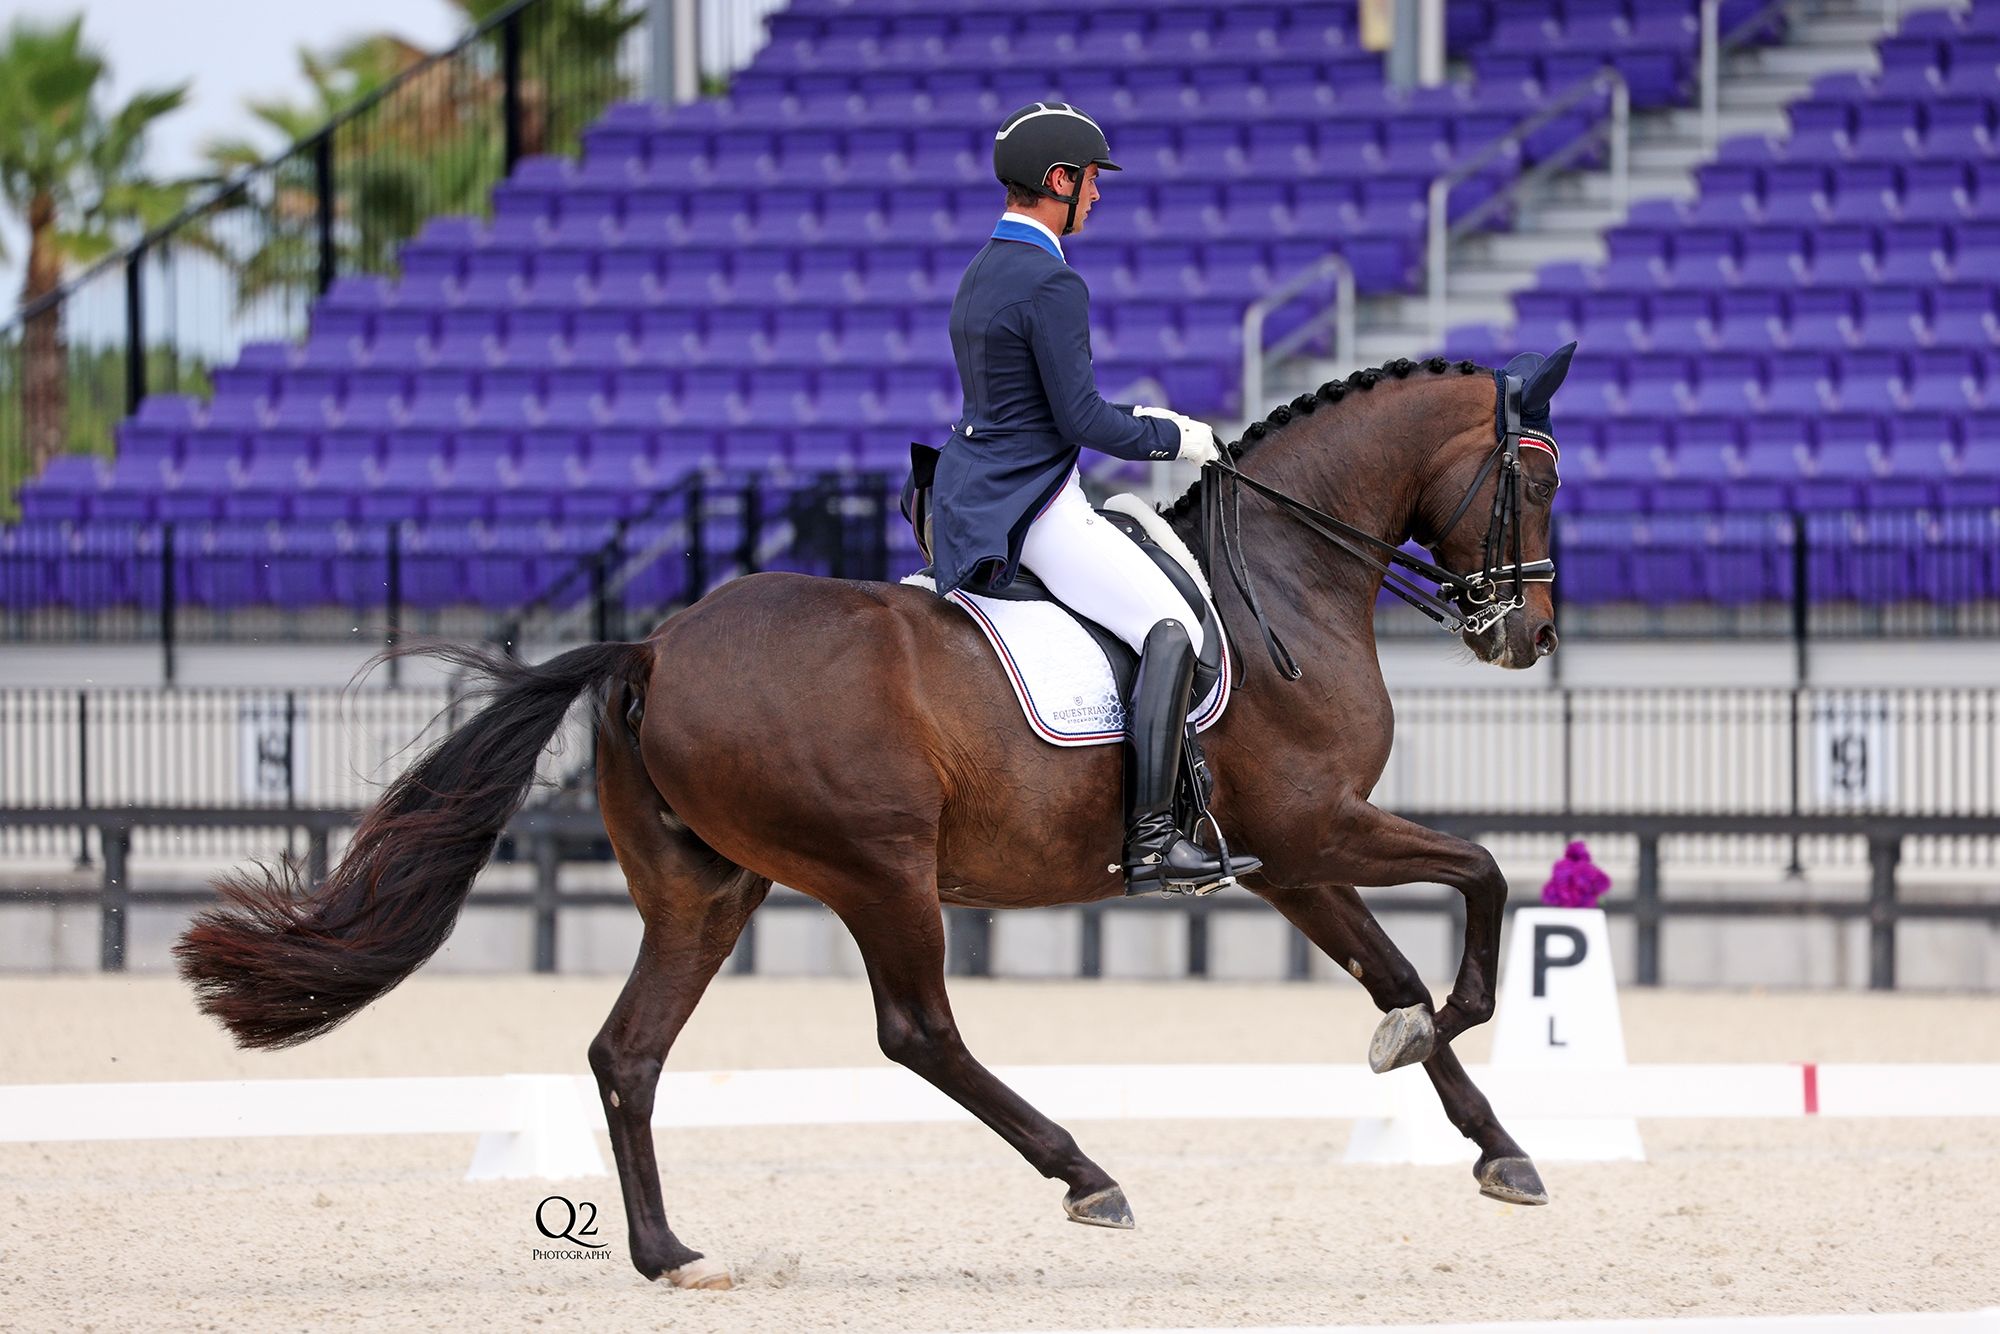 Simonson and Holzer Victorious in Last Day of World Equestrian 